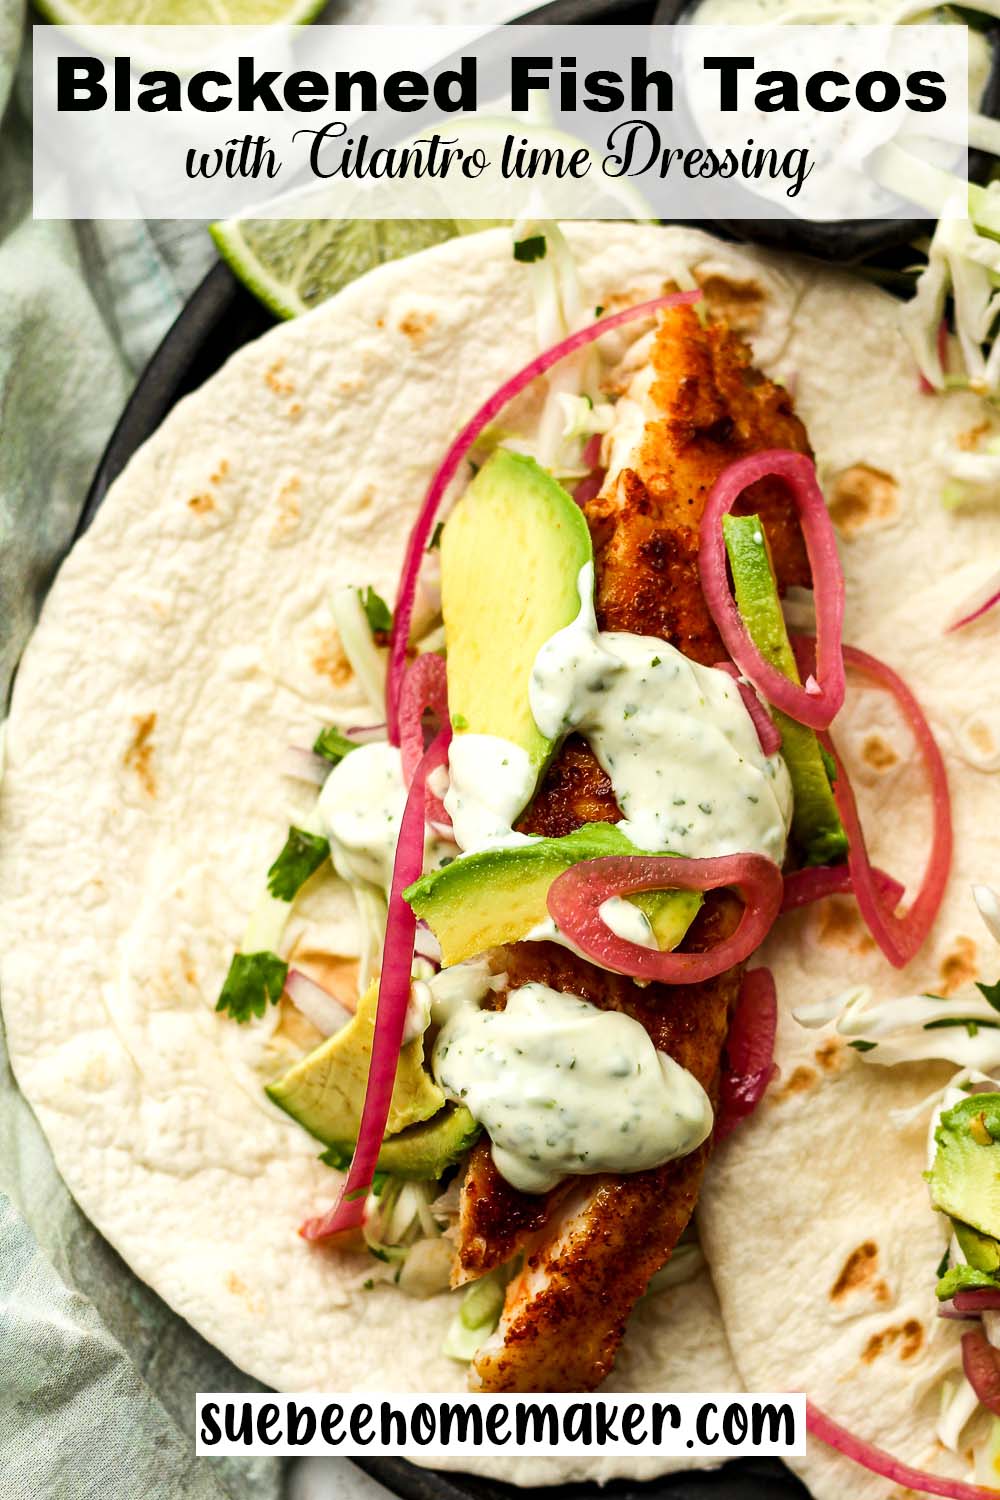 A blackened fish taco with cilantro lime dressing, avocado, and slaw.